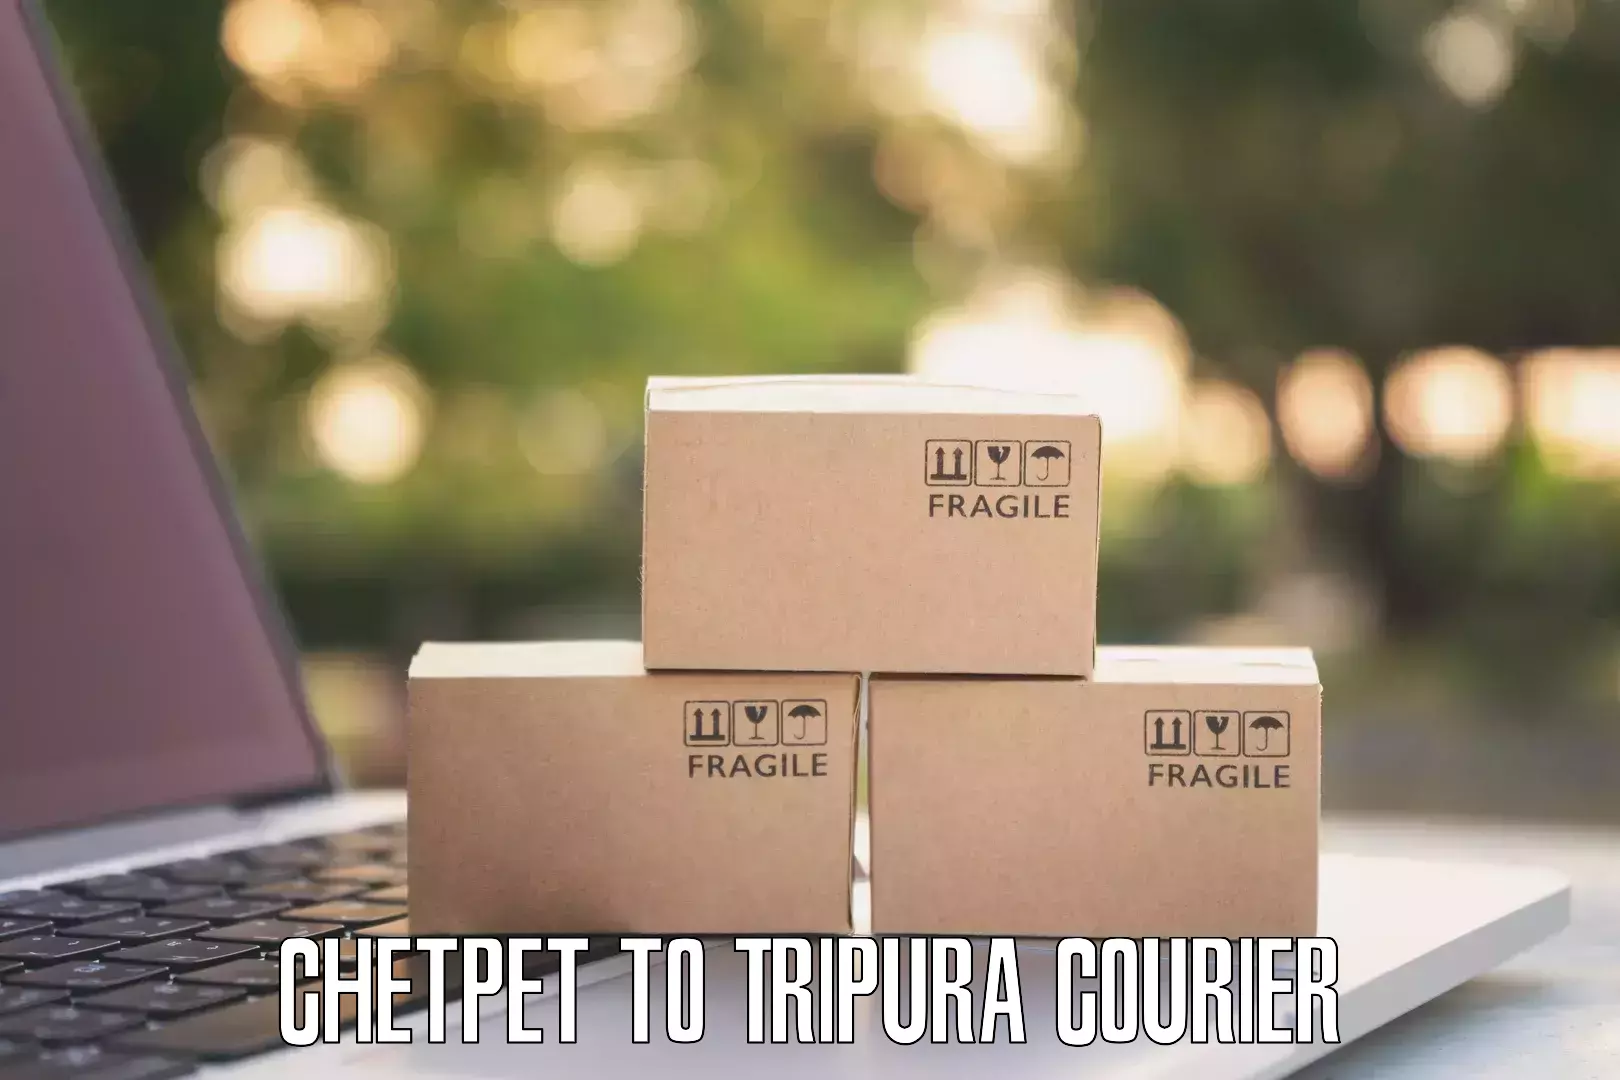 Reliable courier service Chetpet to Tripura